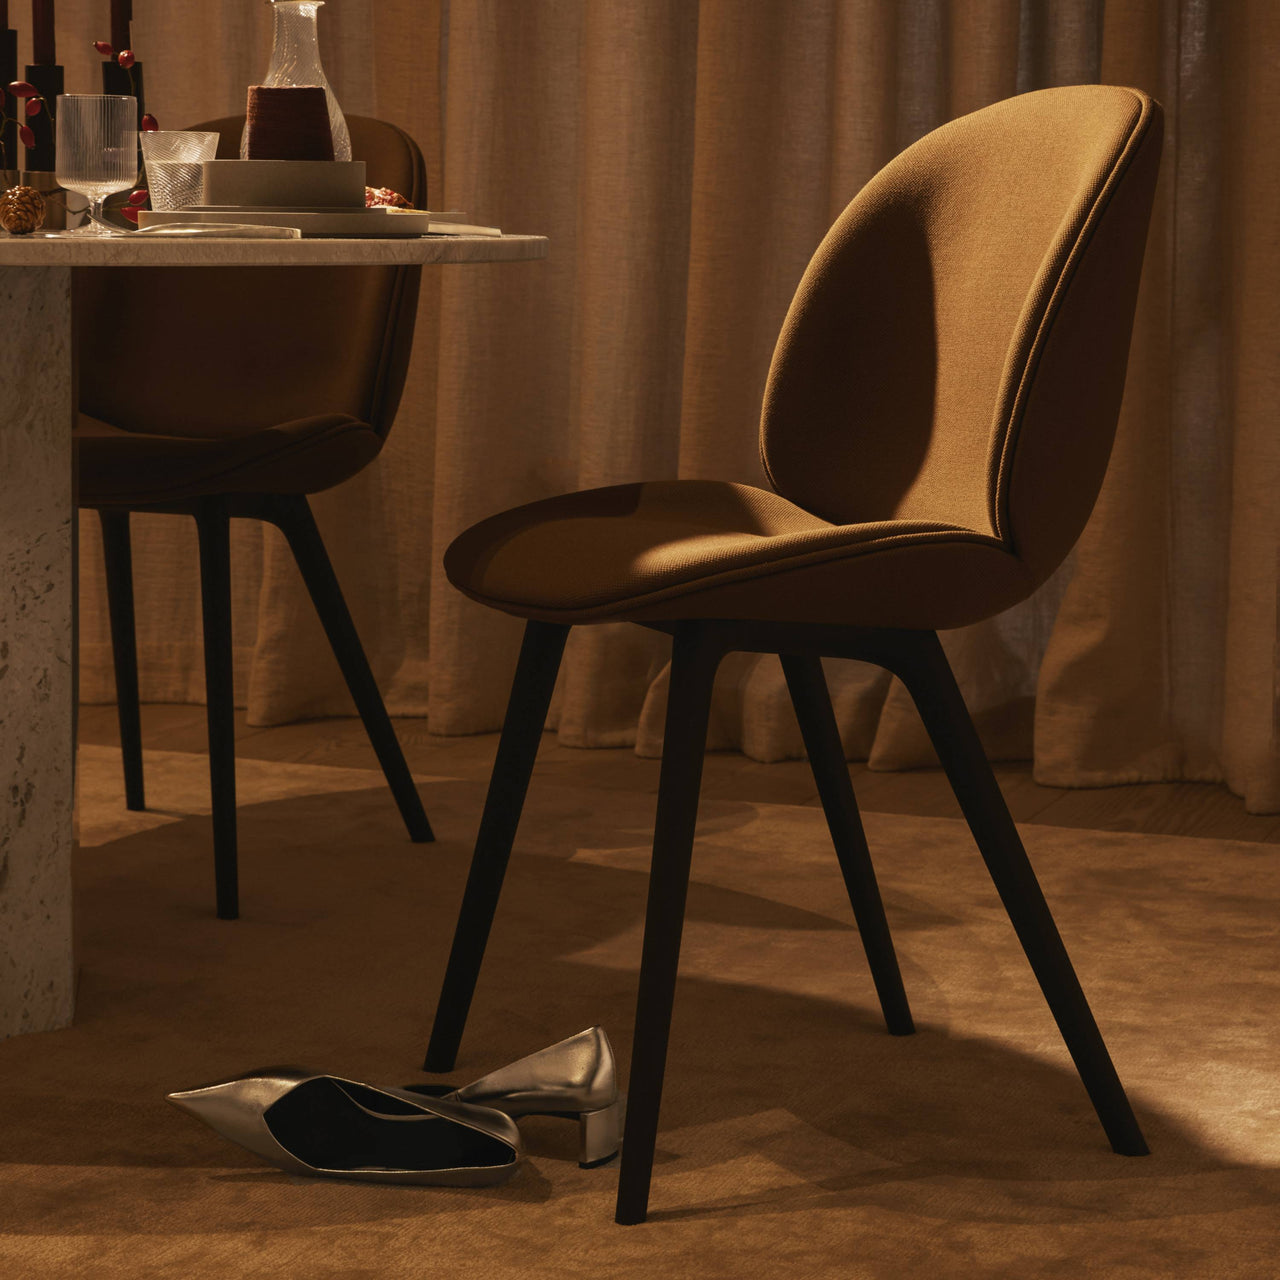 Beetle Dining Chair: Black Plastic Base + Fully Upholstered